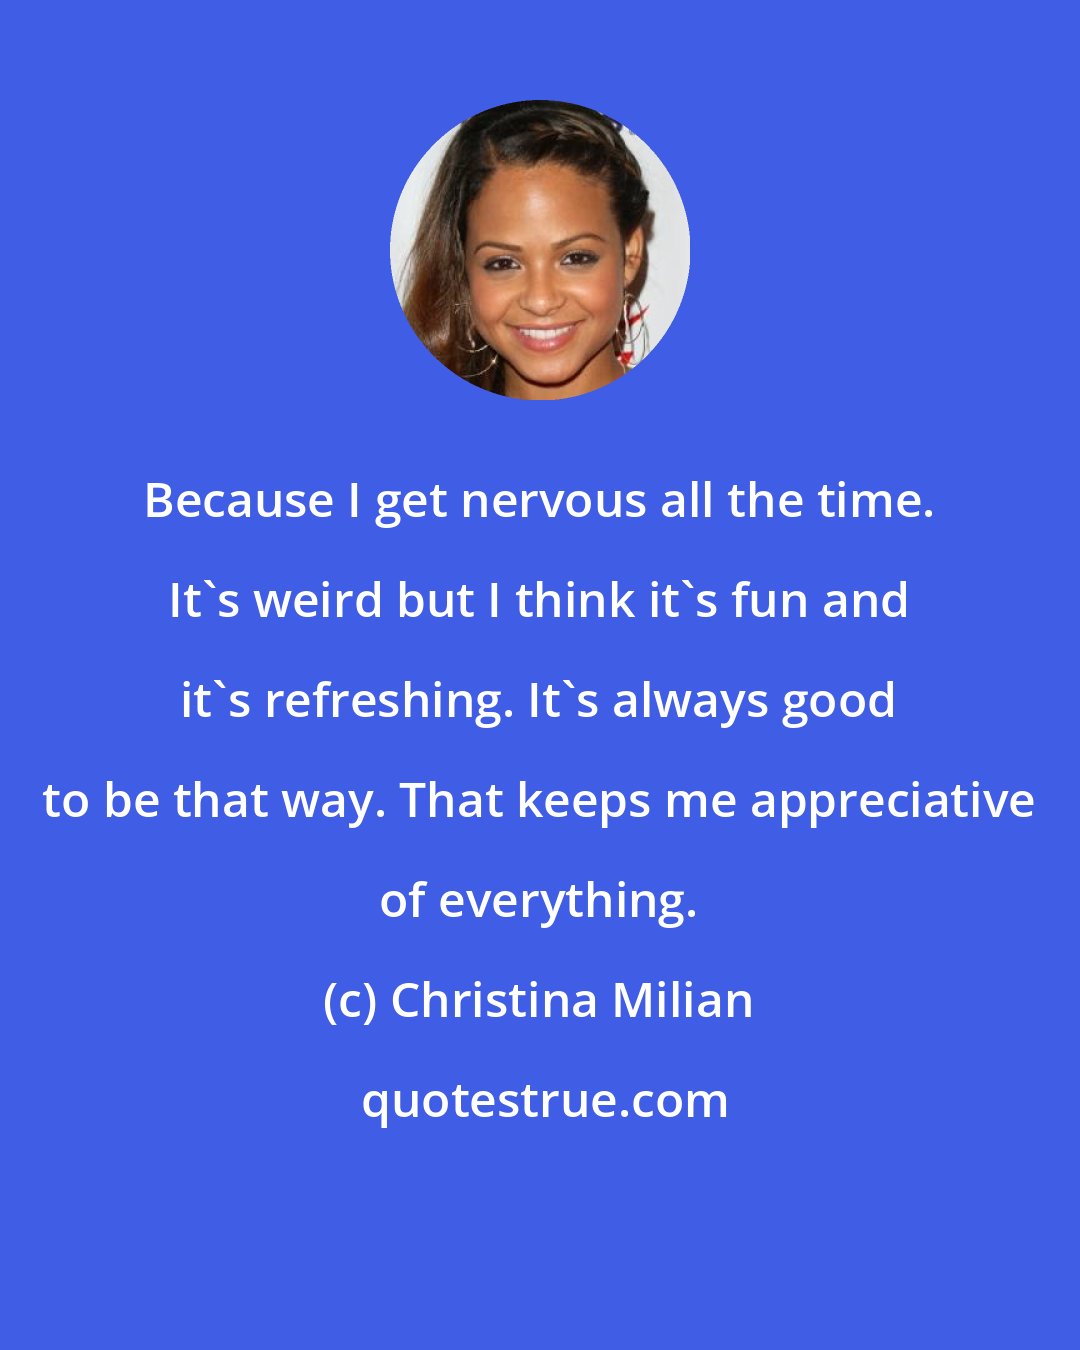 Christina Milian: Because I get nervous all the time. It's weird but I think it's fun and it's refreshing. It's always good to be that way. That keeps me appreciative of everything.